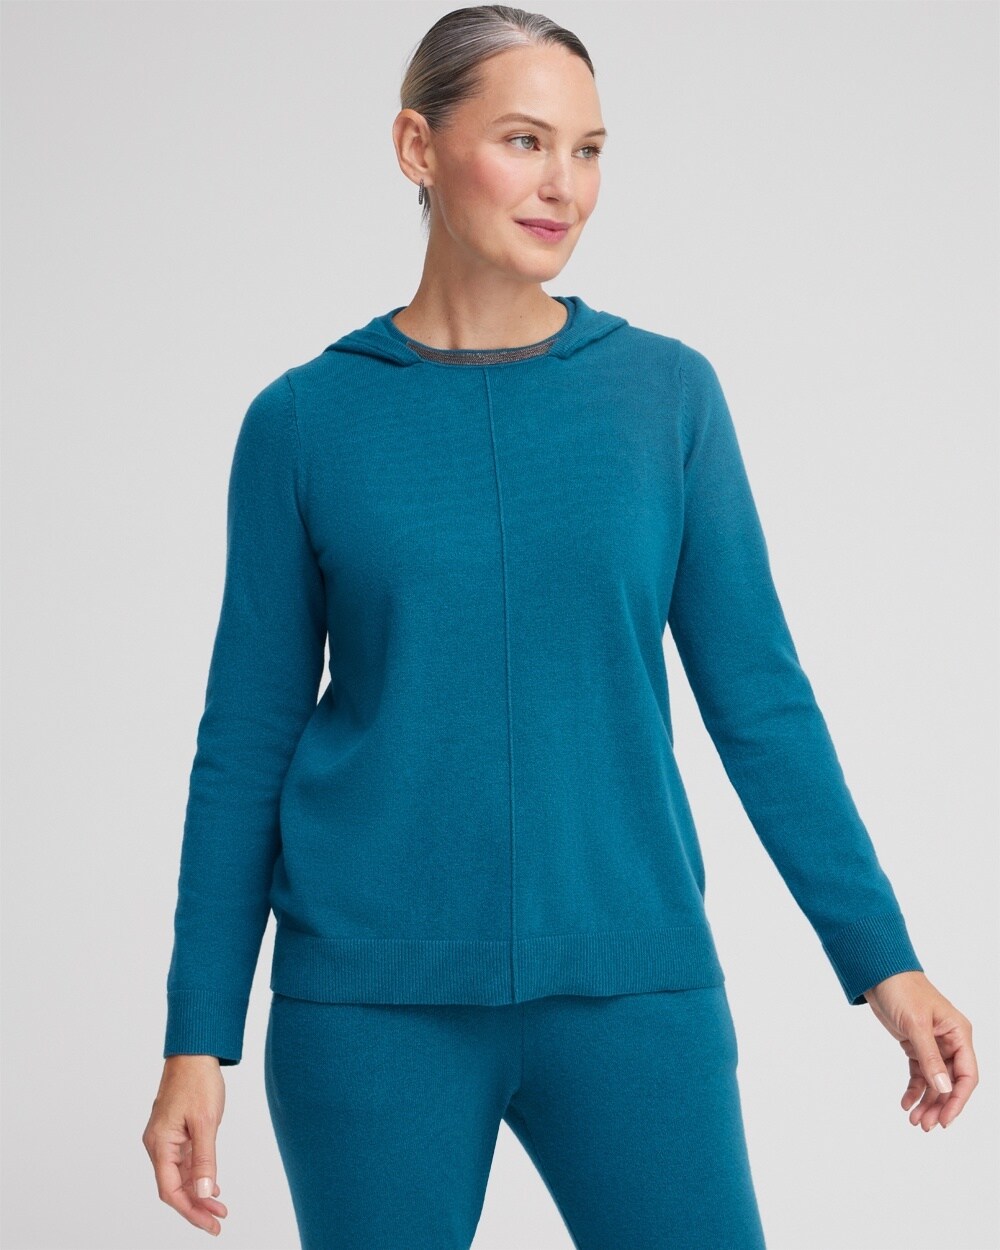 Zenergy Luxe® Cashmere Blend Hooded Sweater